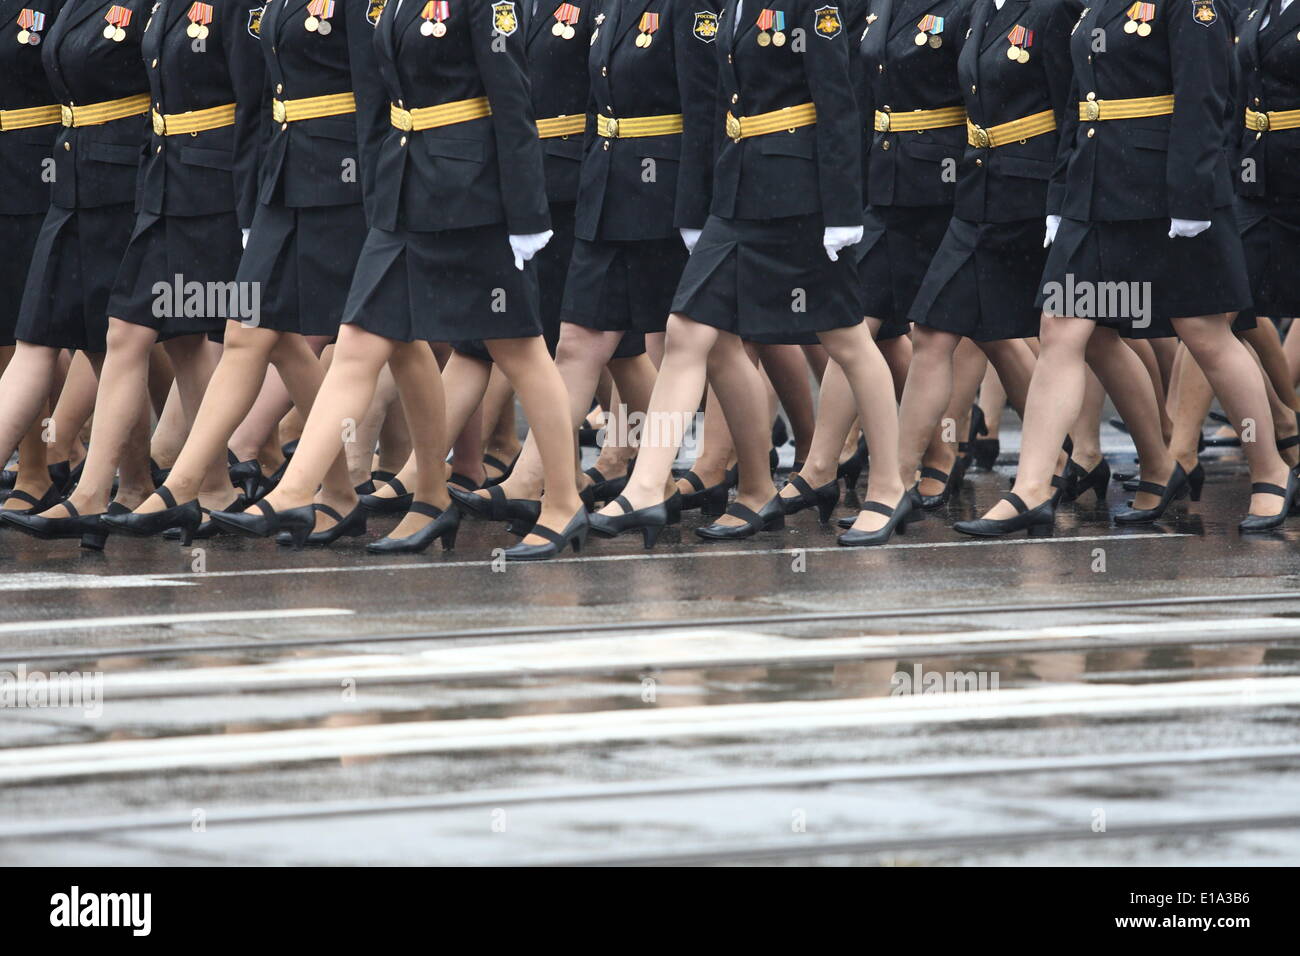 Kaliningrad, RUSSIA. 9th May, 2014. Kaliningrad, Russia 9th, May 2014 Russian female soldiers march during a large military parade in Kaliningrad, Russia, to mark Victory Day, May 9, 2014. Thousands of Russian troops marched today throughout the country to mark 69 years since victory in World War II in a show of military might amid tensions in Ukraine following Moscow's annexation of Crimea. © Michal Fludra/NurPhoto/ZUMAPRESS.com/Alamy Live News Stock Photo